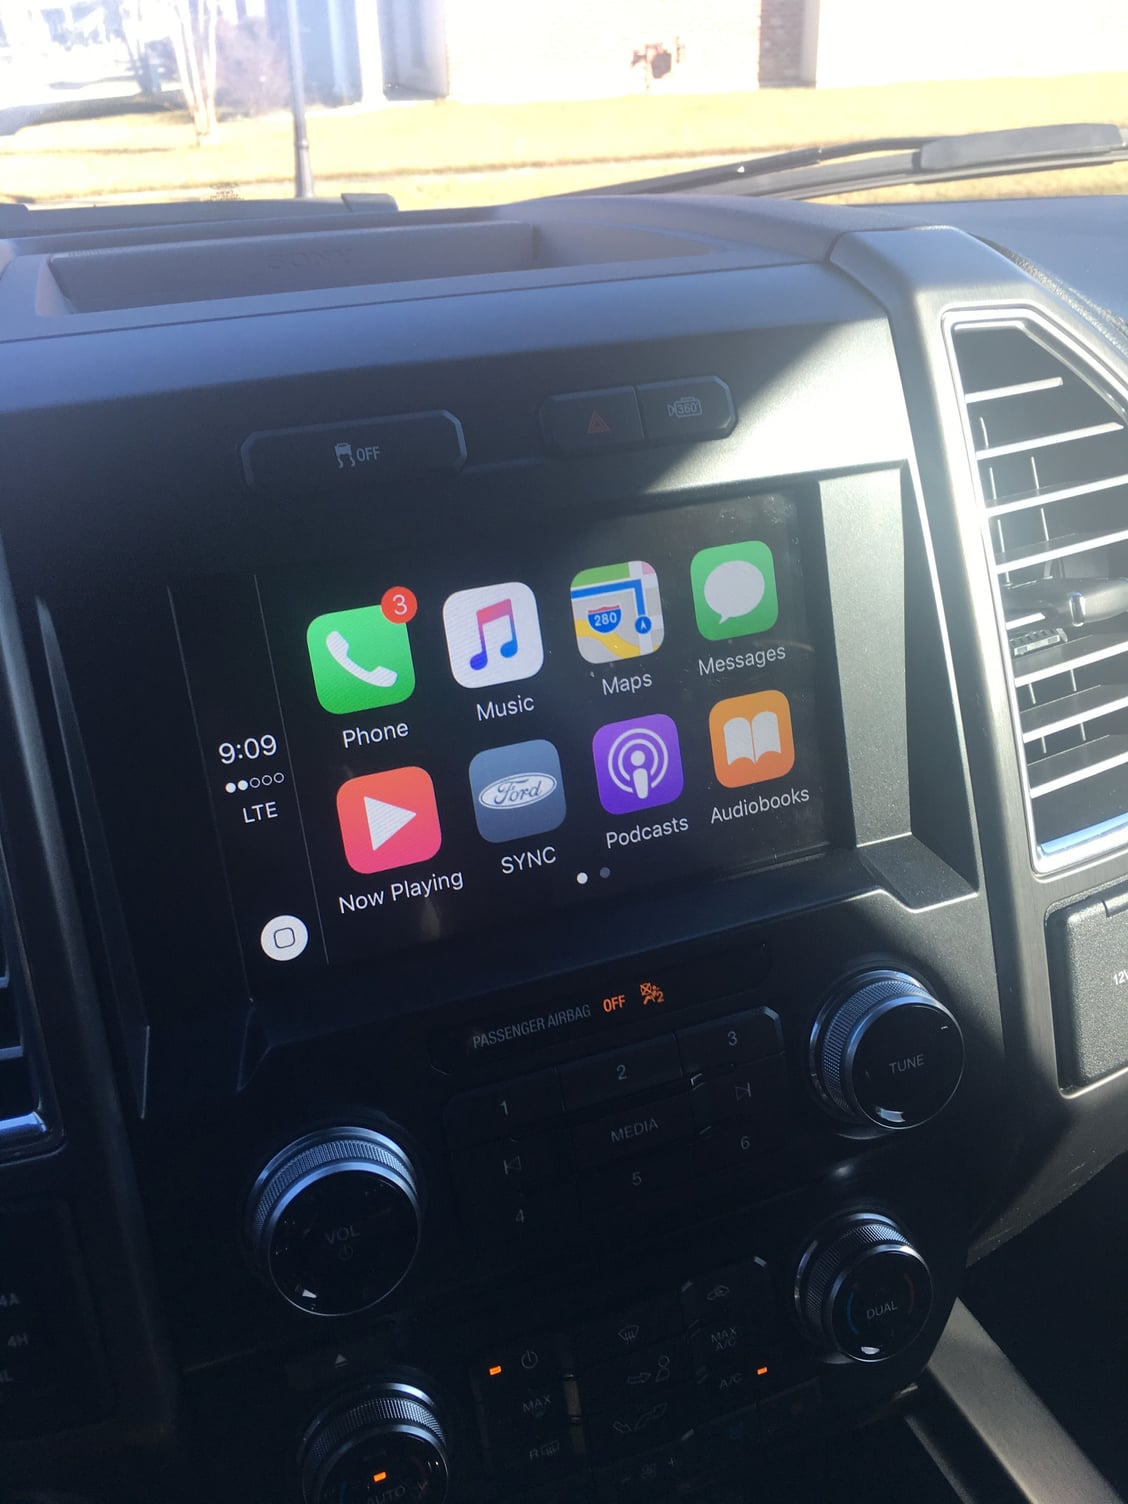 Current SYNC 3 and CarPlay/Android Auto Information Page